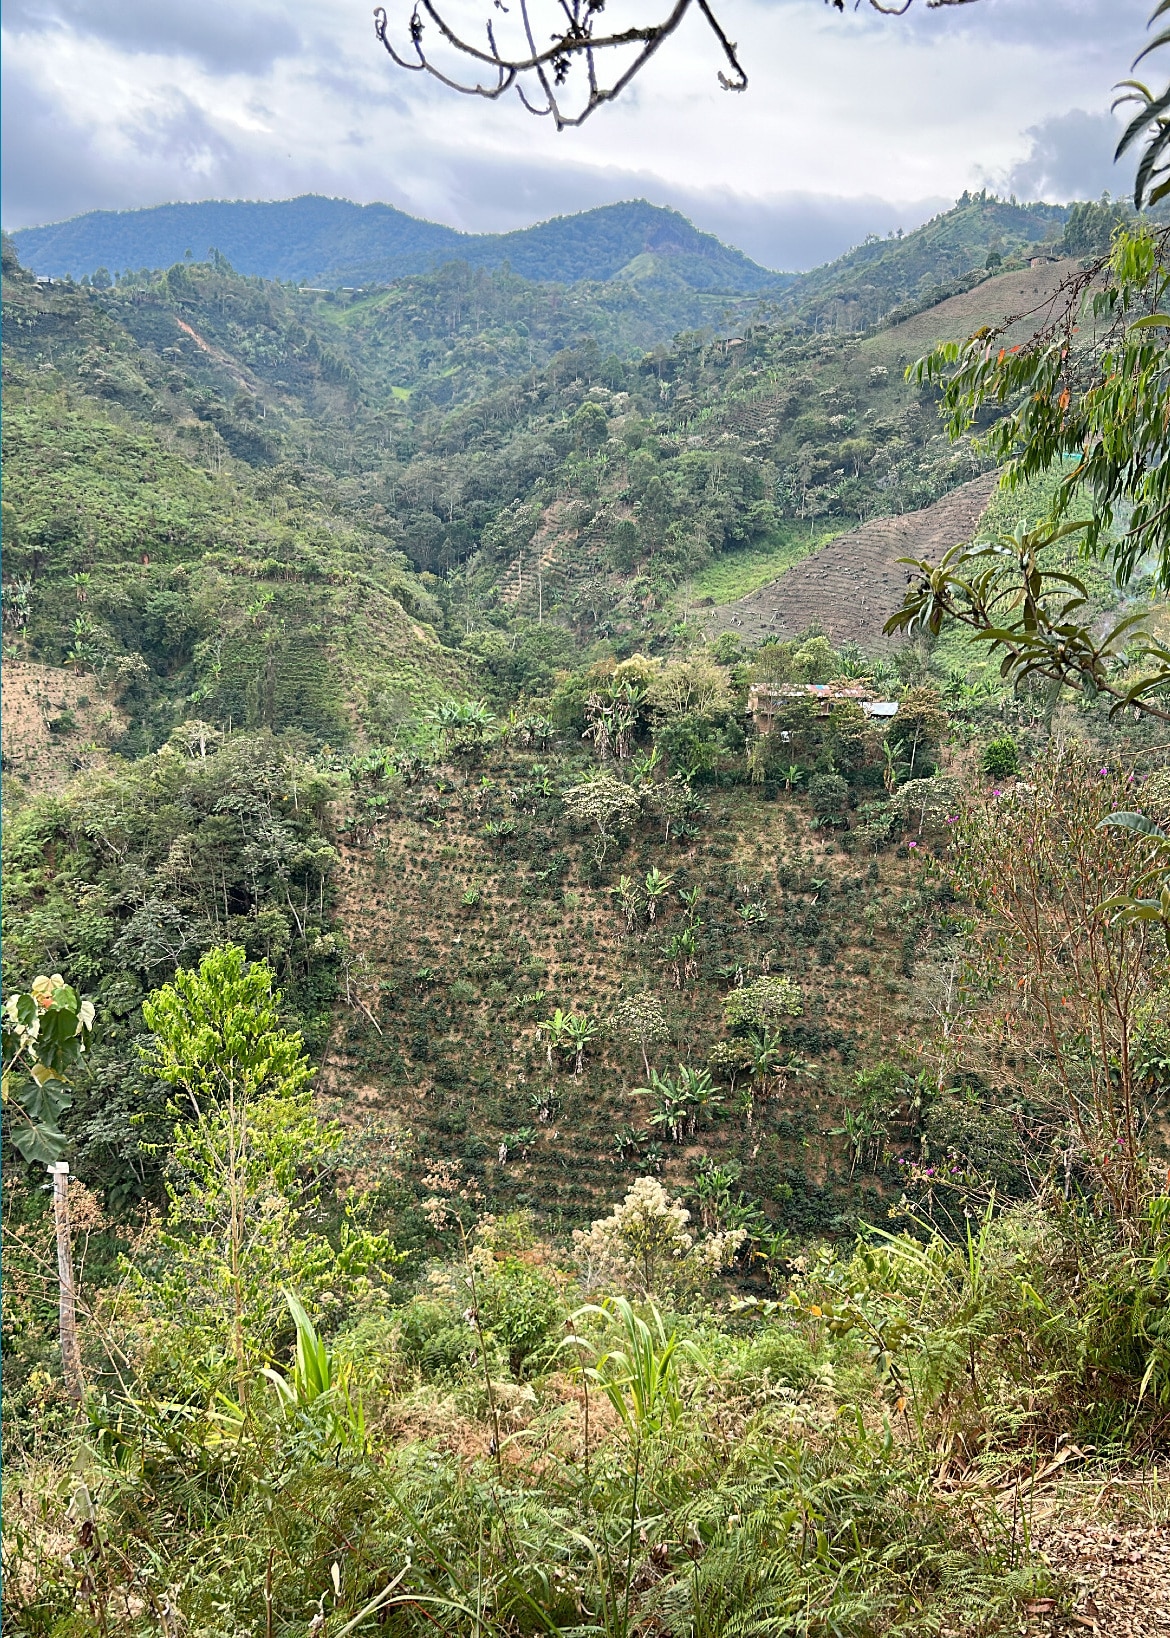 A scenic photo of a coffee farm on the steep side of a mountain.